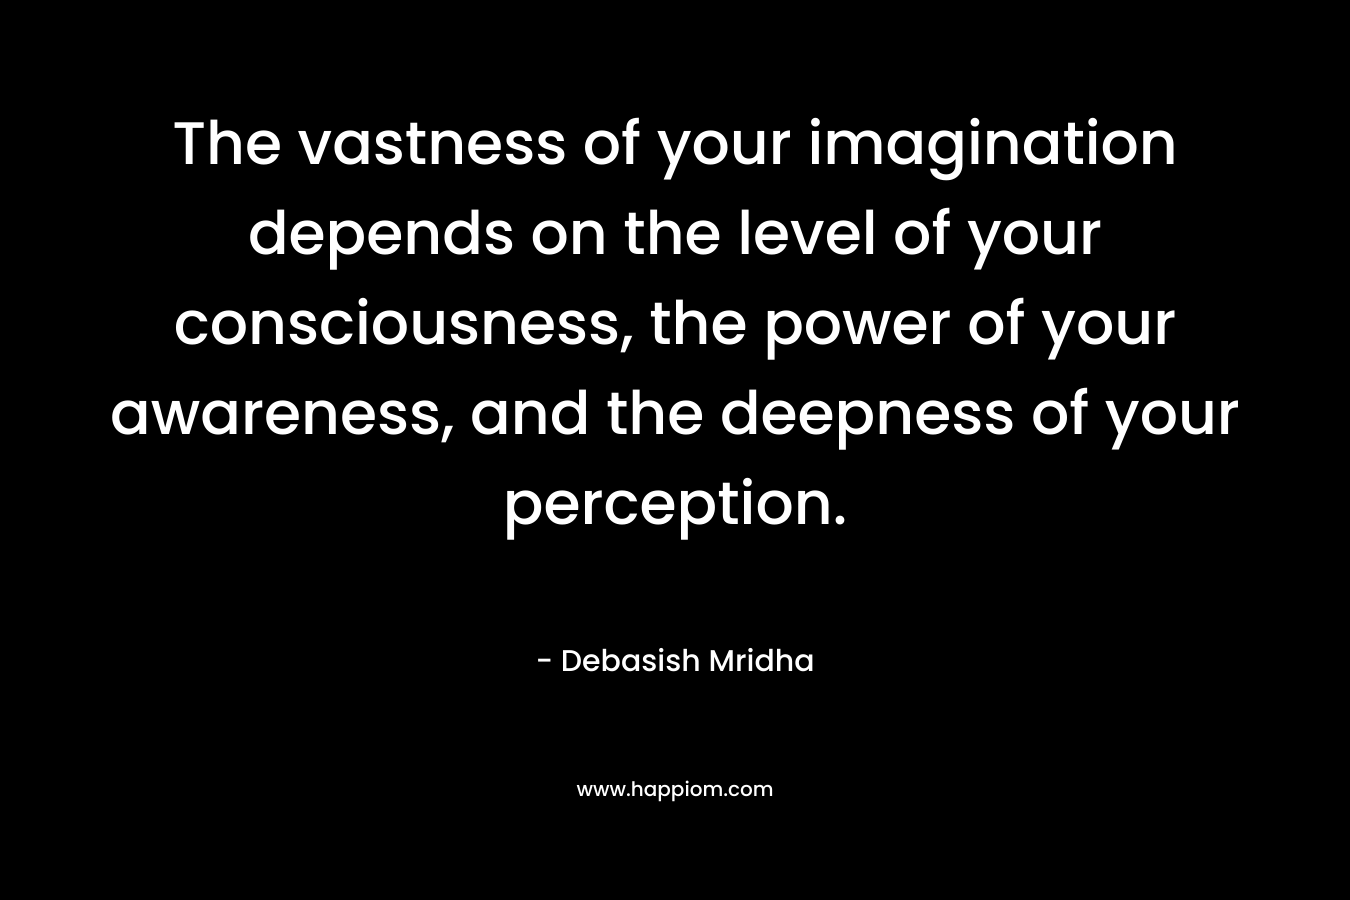 The vastness of your imagination depends on the level of your consciousness, the power of your awareness, and the deepness of your perception. – Debasish Mridha